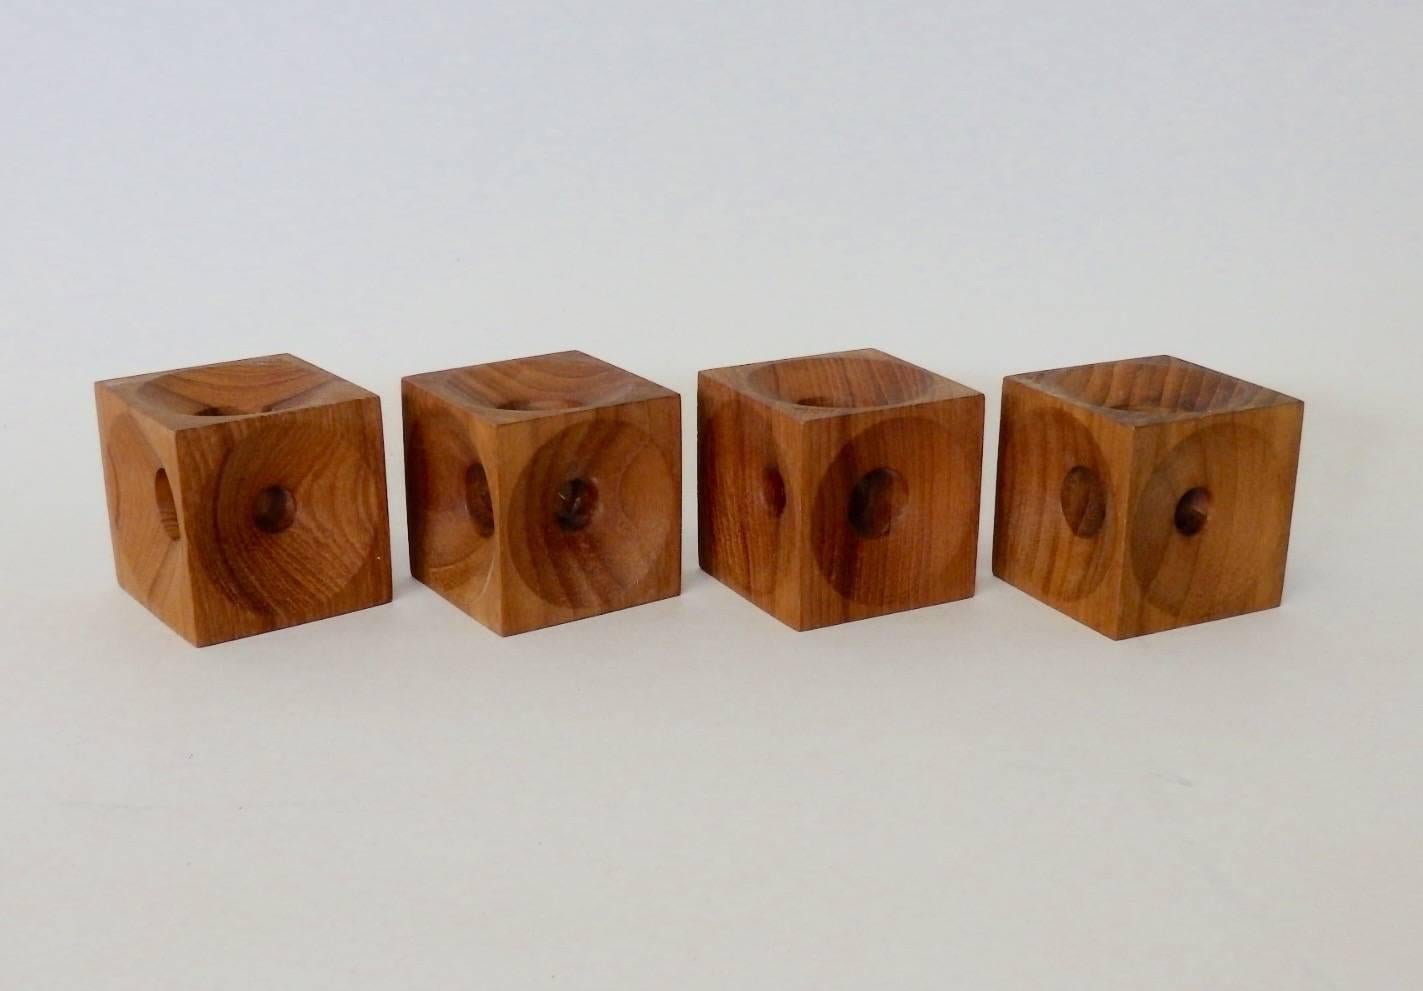 Nicely crafted solid Teak candle stands. Each side of each cube has a different diameter hole for use with varying candle sizes. Well marked E.H. Denmark on each piece.